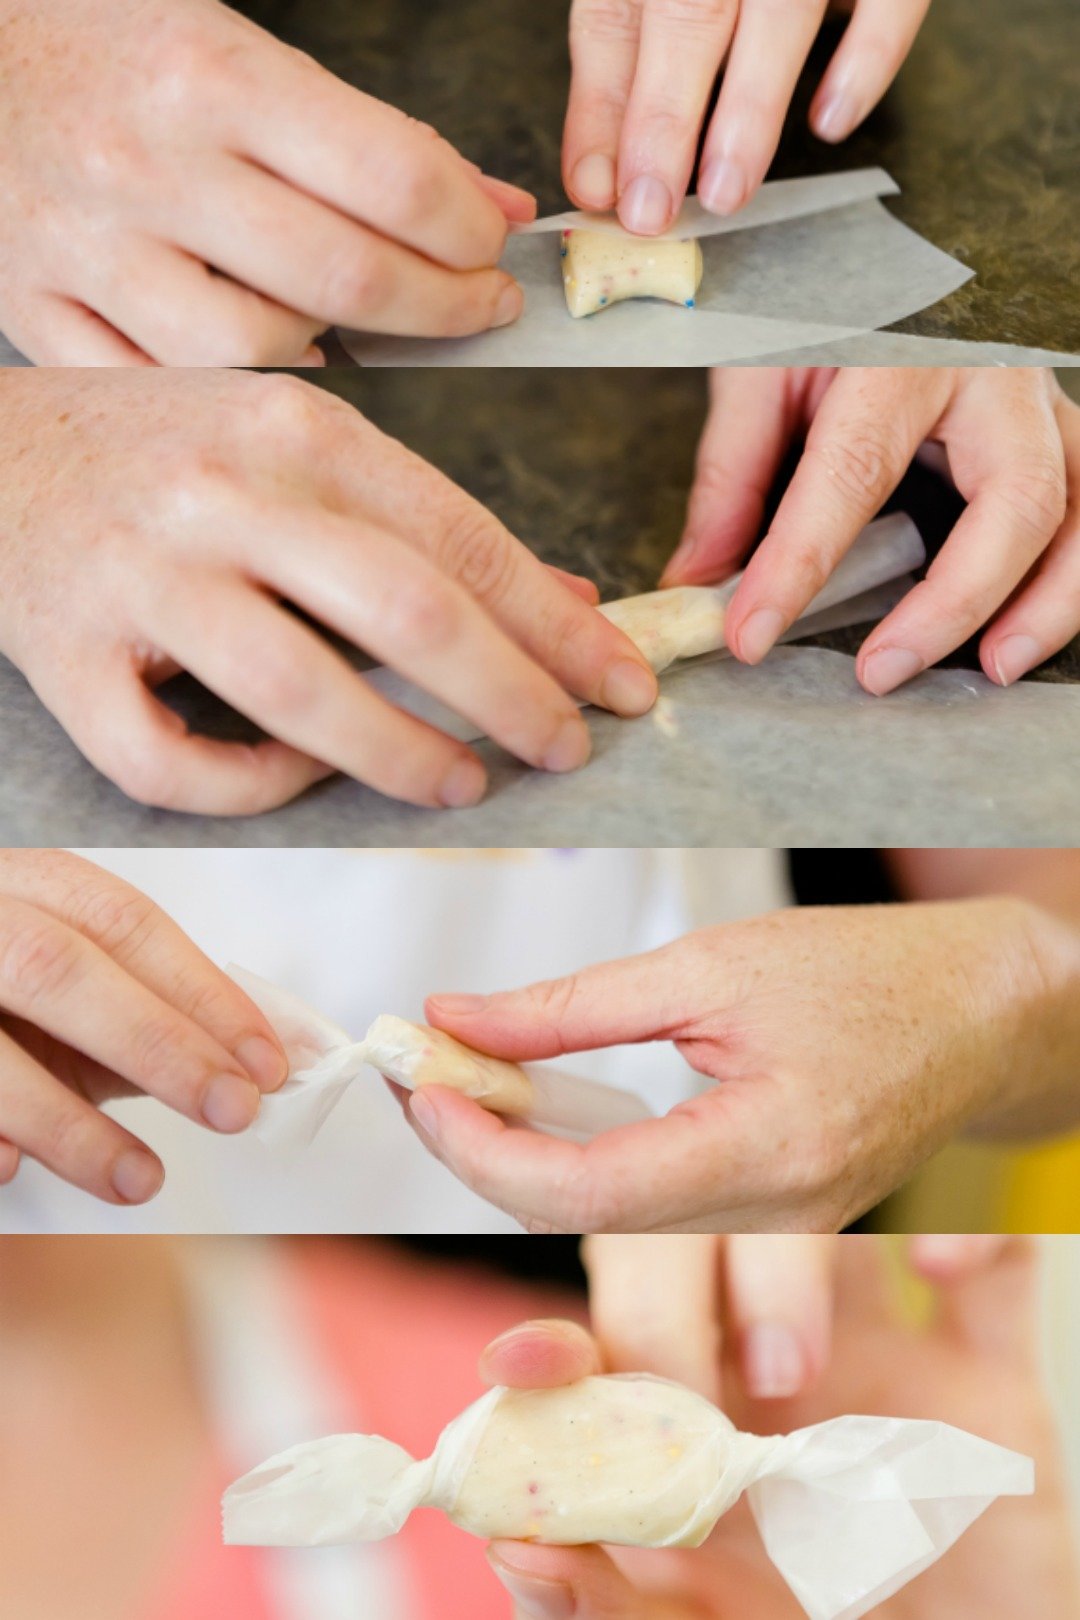 Four photos that show folding waxed paper over salt water taffy and wrapping it up